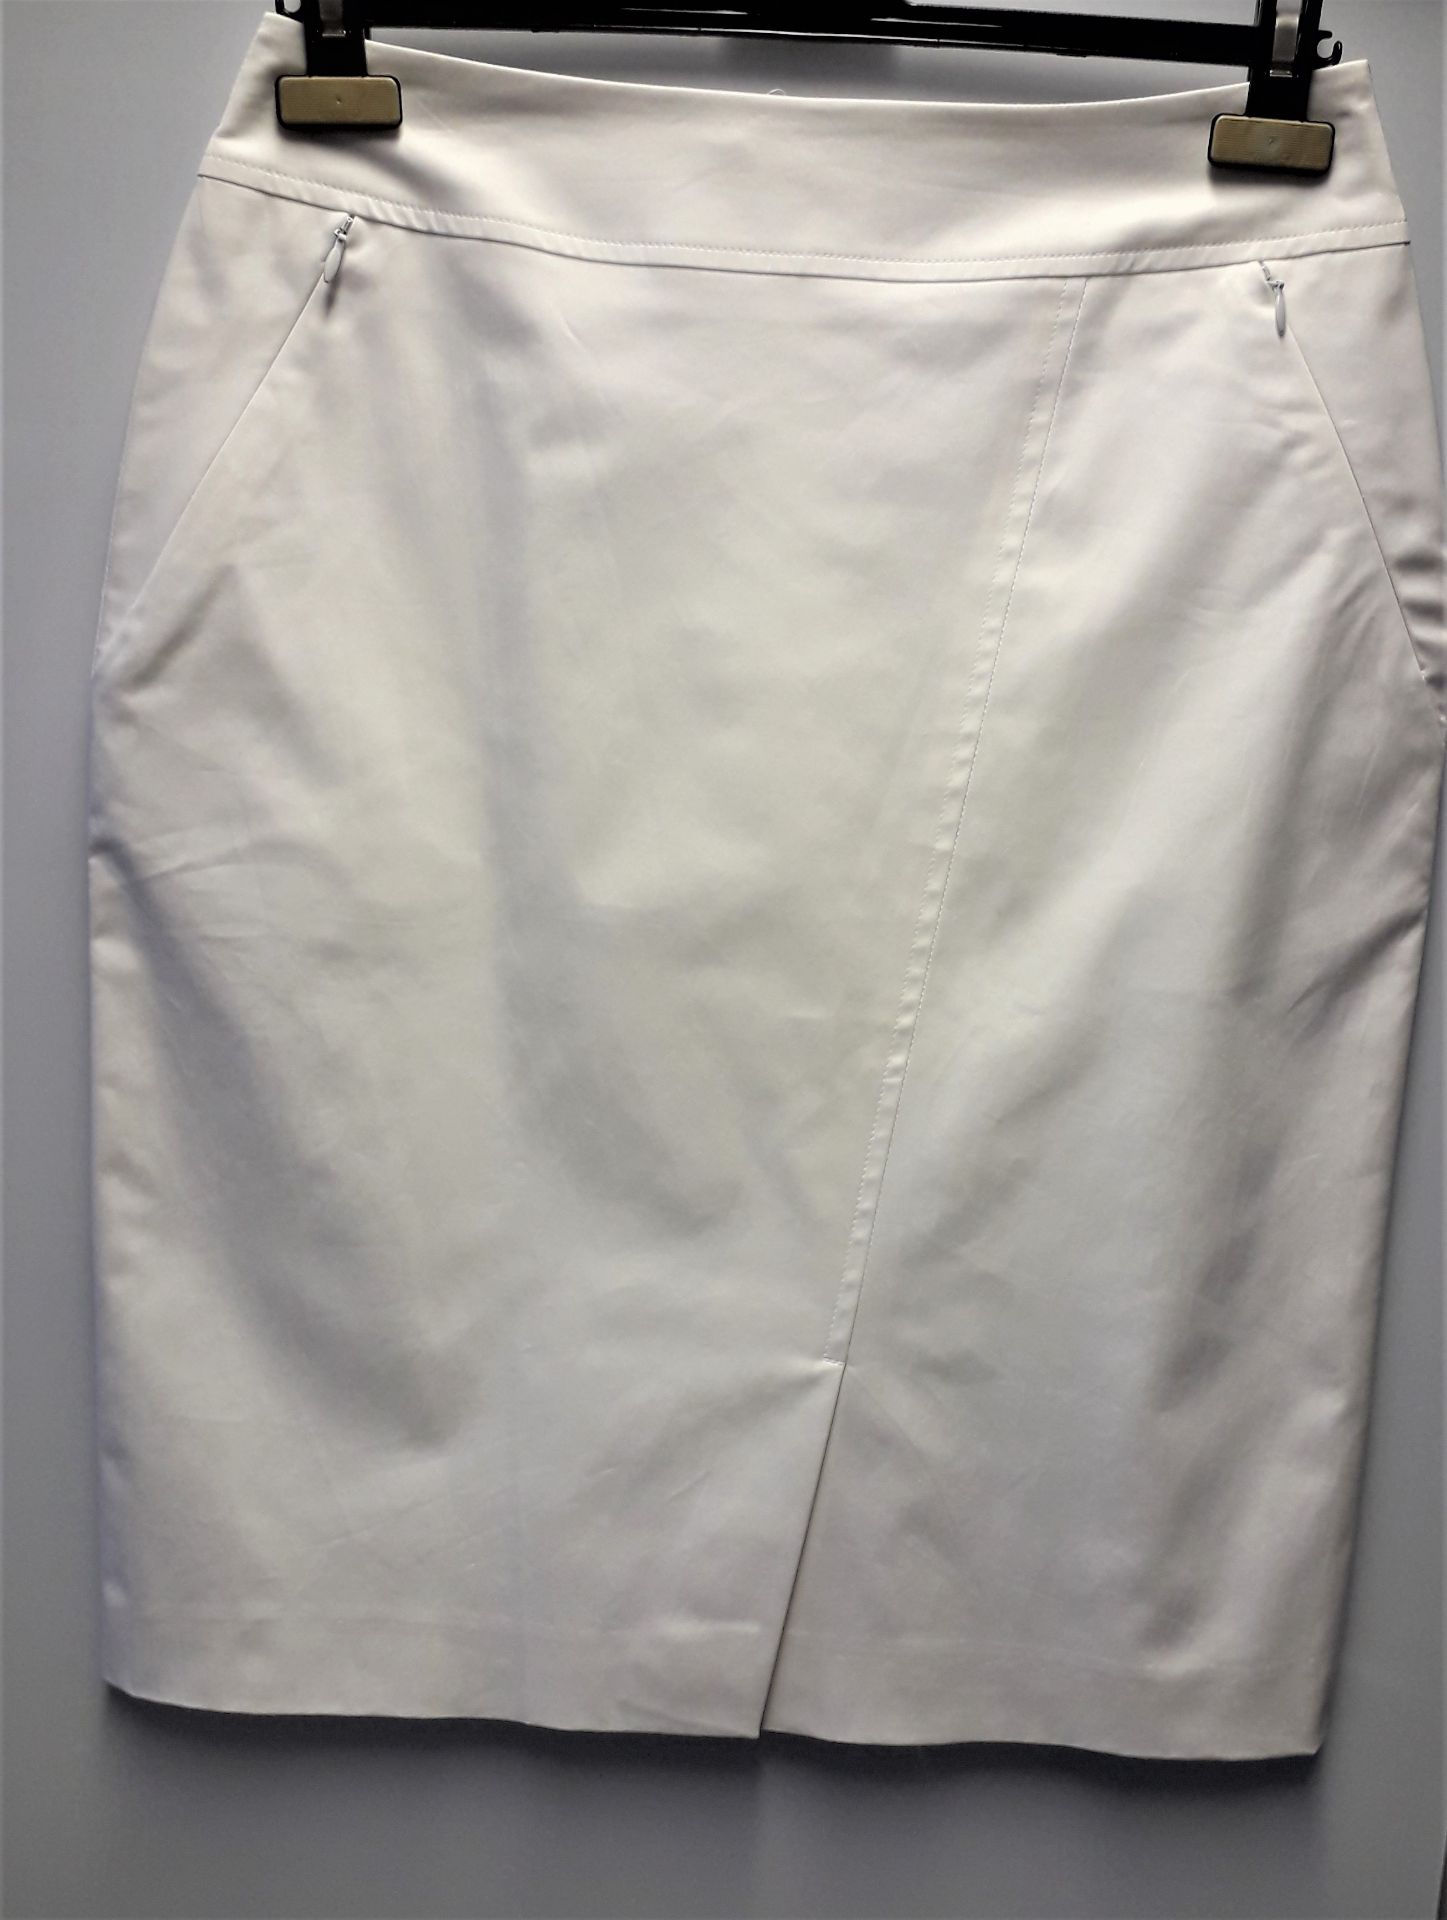 1 x Anne Belin White Skirt - Size: 14 - Material: 100% Cotton - From a High End Clothing Boutique In